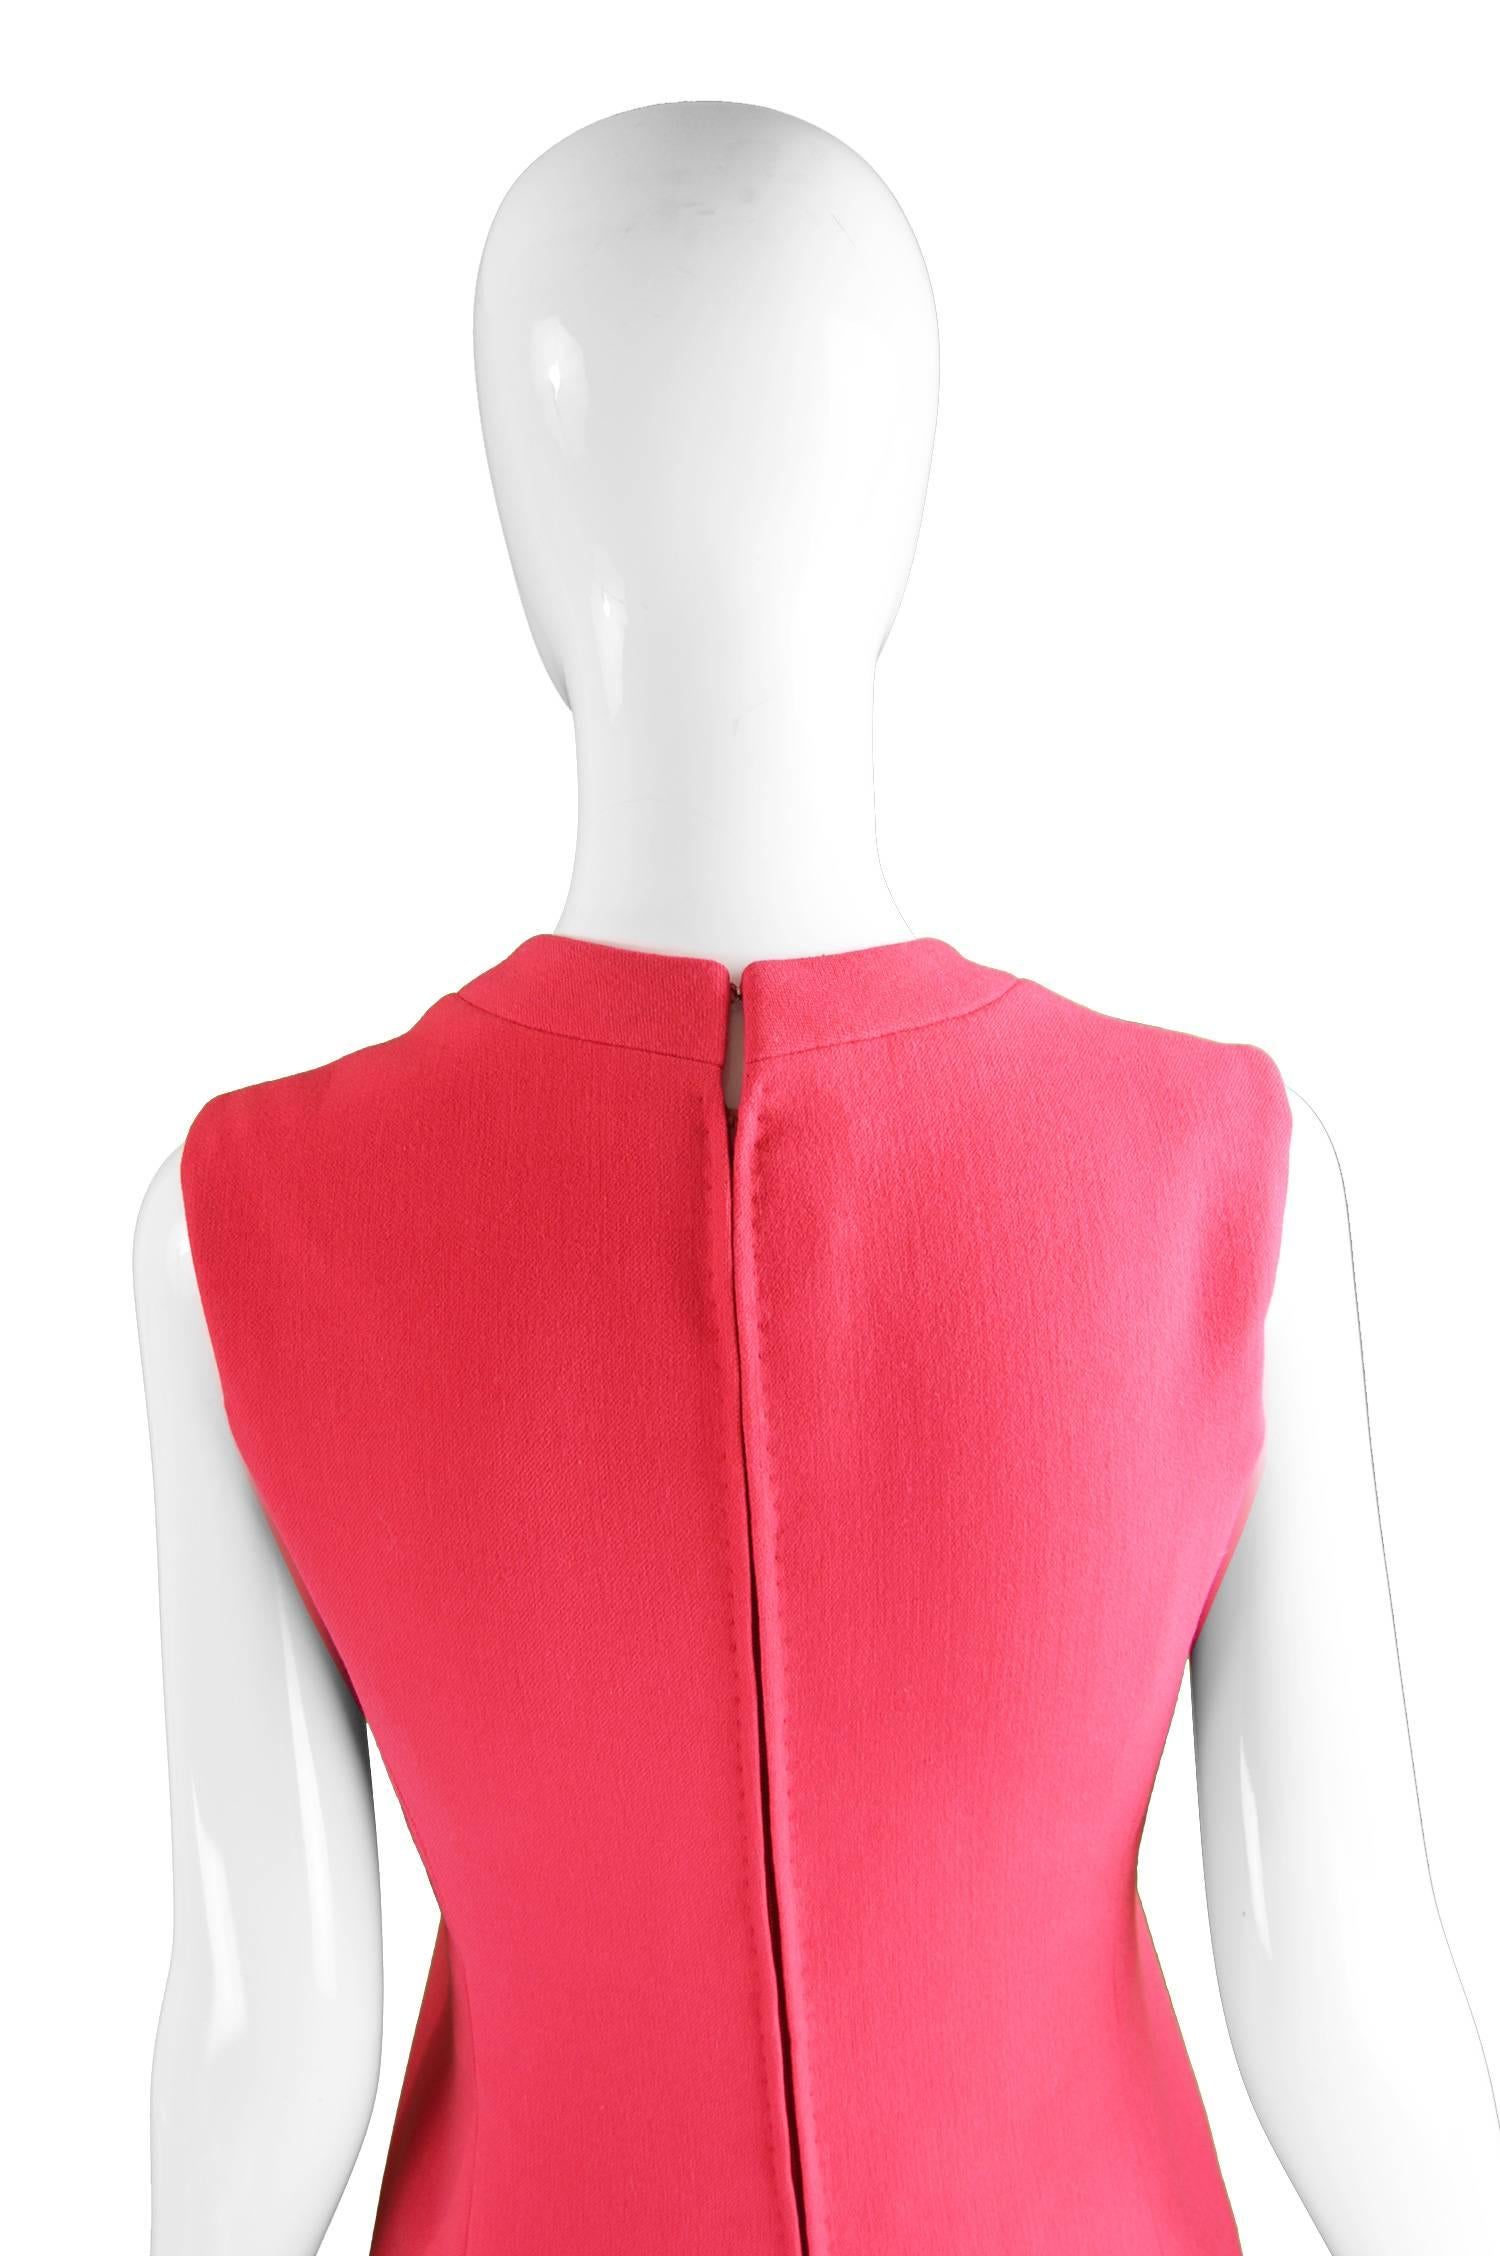 Maggy Rouff Haute Couture Pink Wool Vintage Shift Dress, 1960s For Sale ...